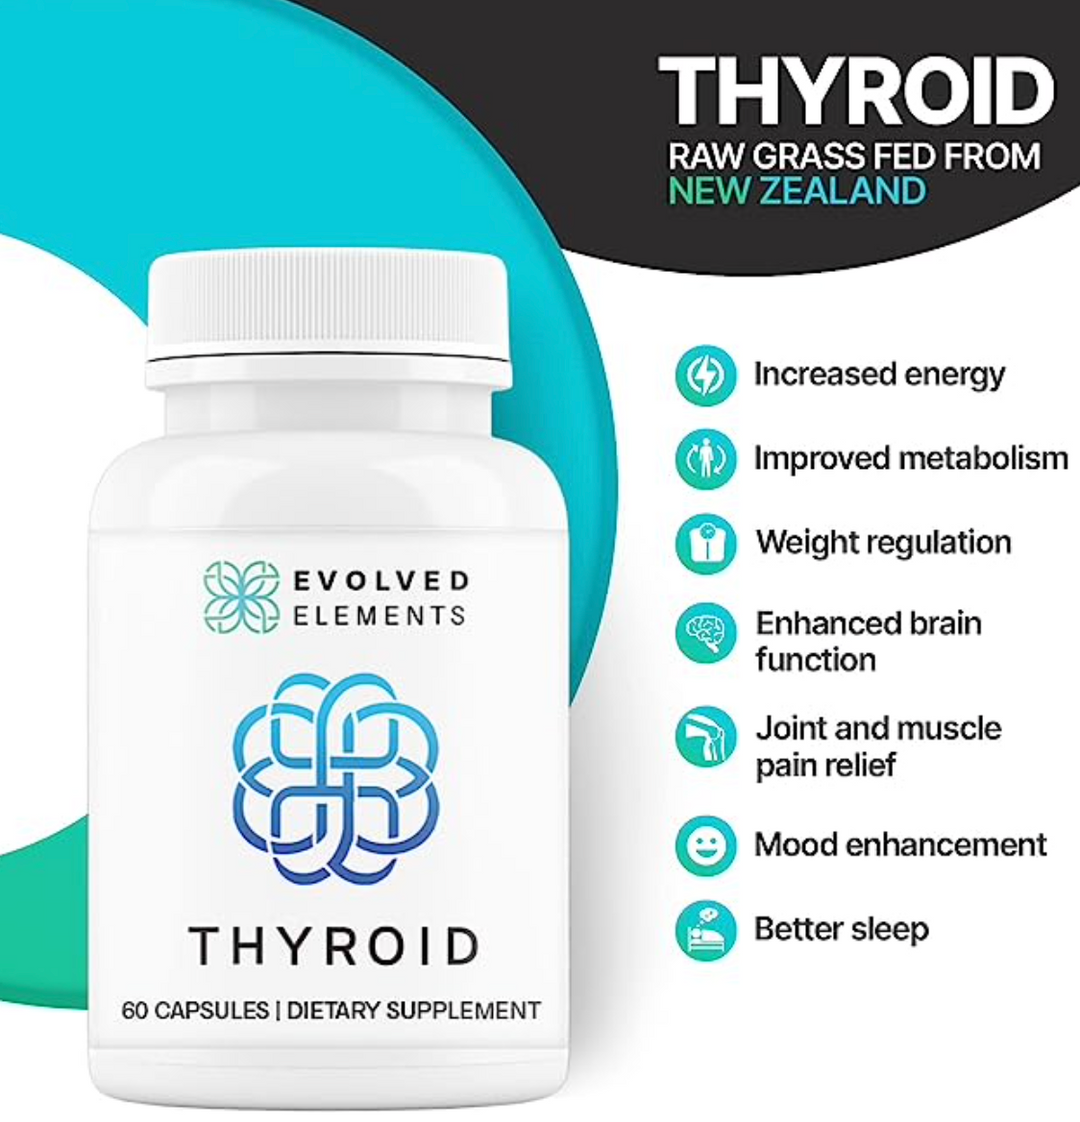 Boost Your Wellness Journey with Evolved Elements Grass-fed Thyroid